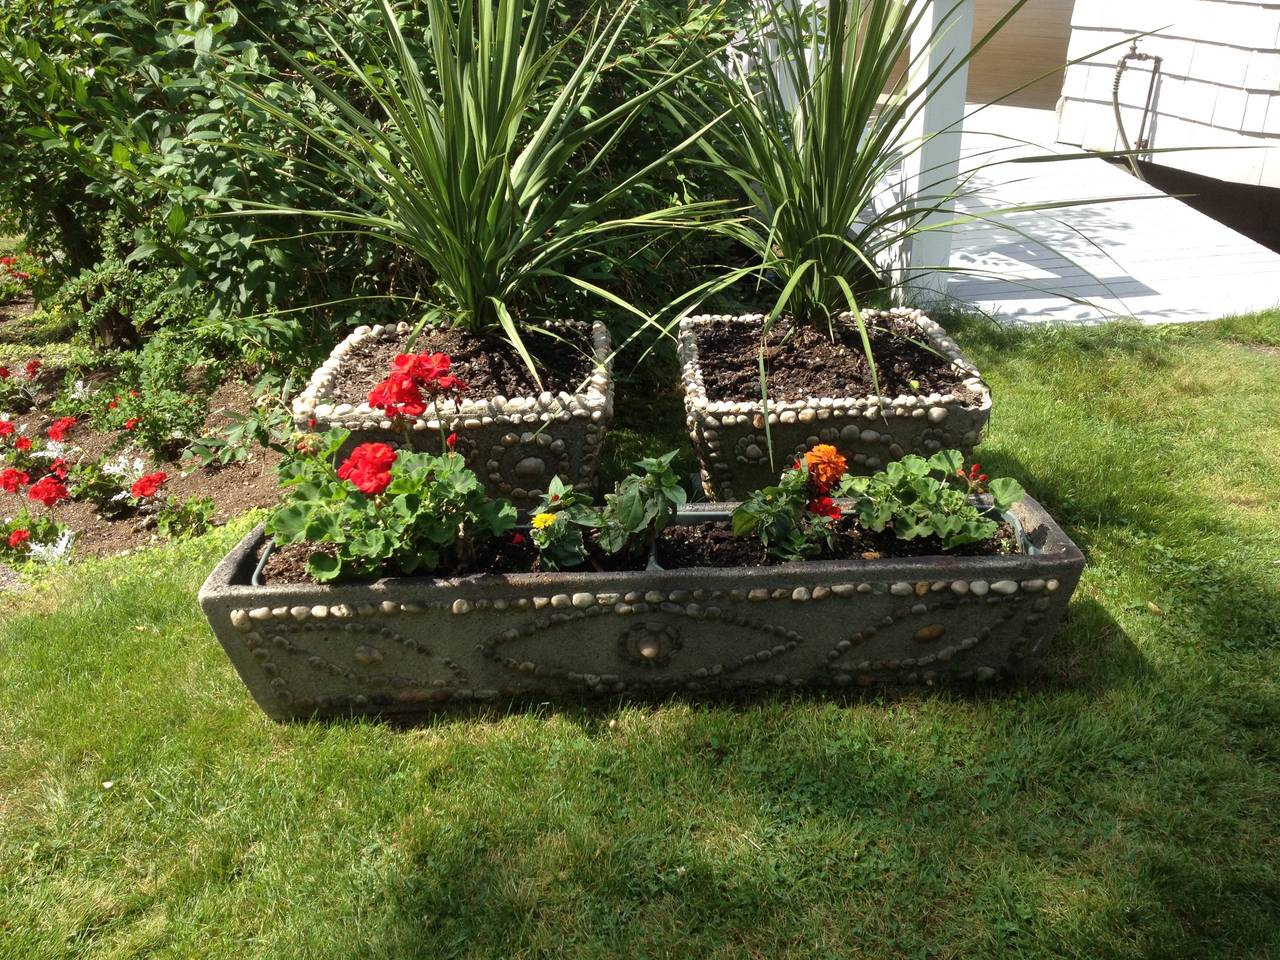 Here's a beautiful old American antique set of three (3)  hand made and hand inlaid circa 1915 stone planters- unique.

Background:  These unique antique planters were crafted in a refined hand made style with iron armature, concrete, and inlaid